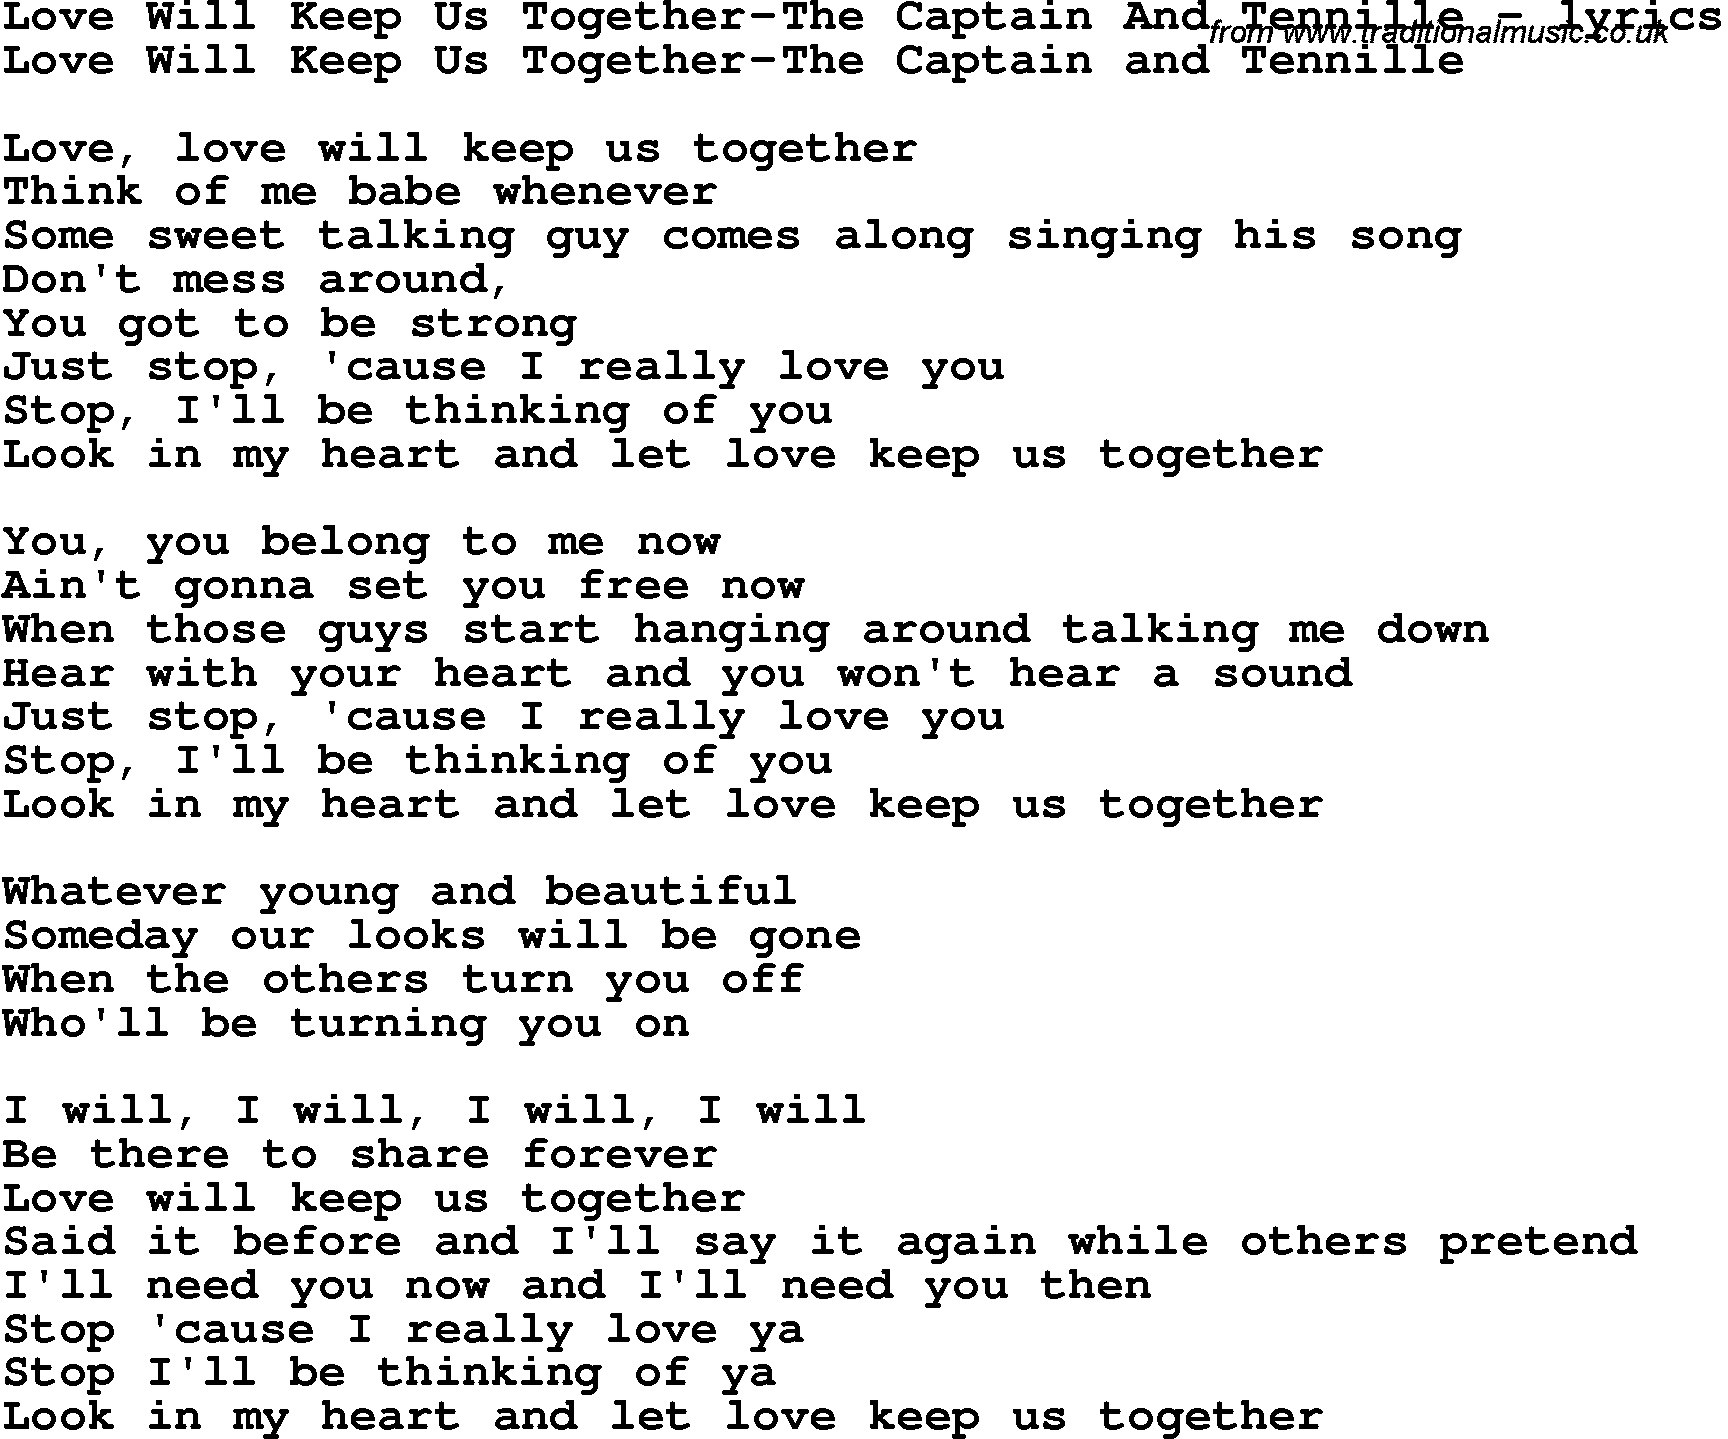 Love Song Lyrics for: Love Will Keep Us Together-The Captain And Tennille